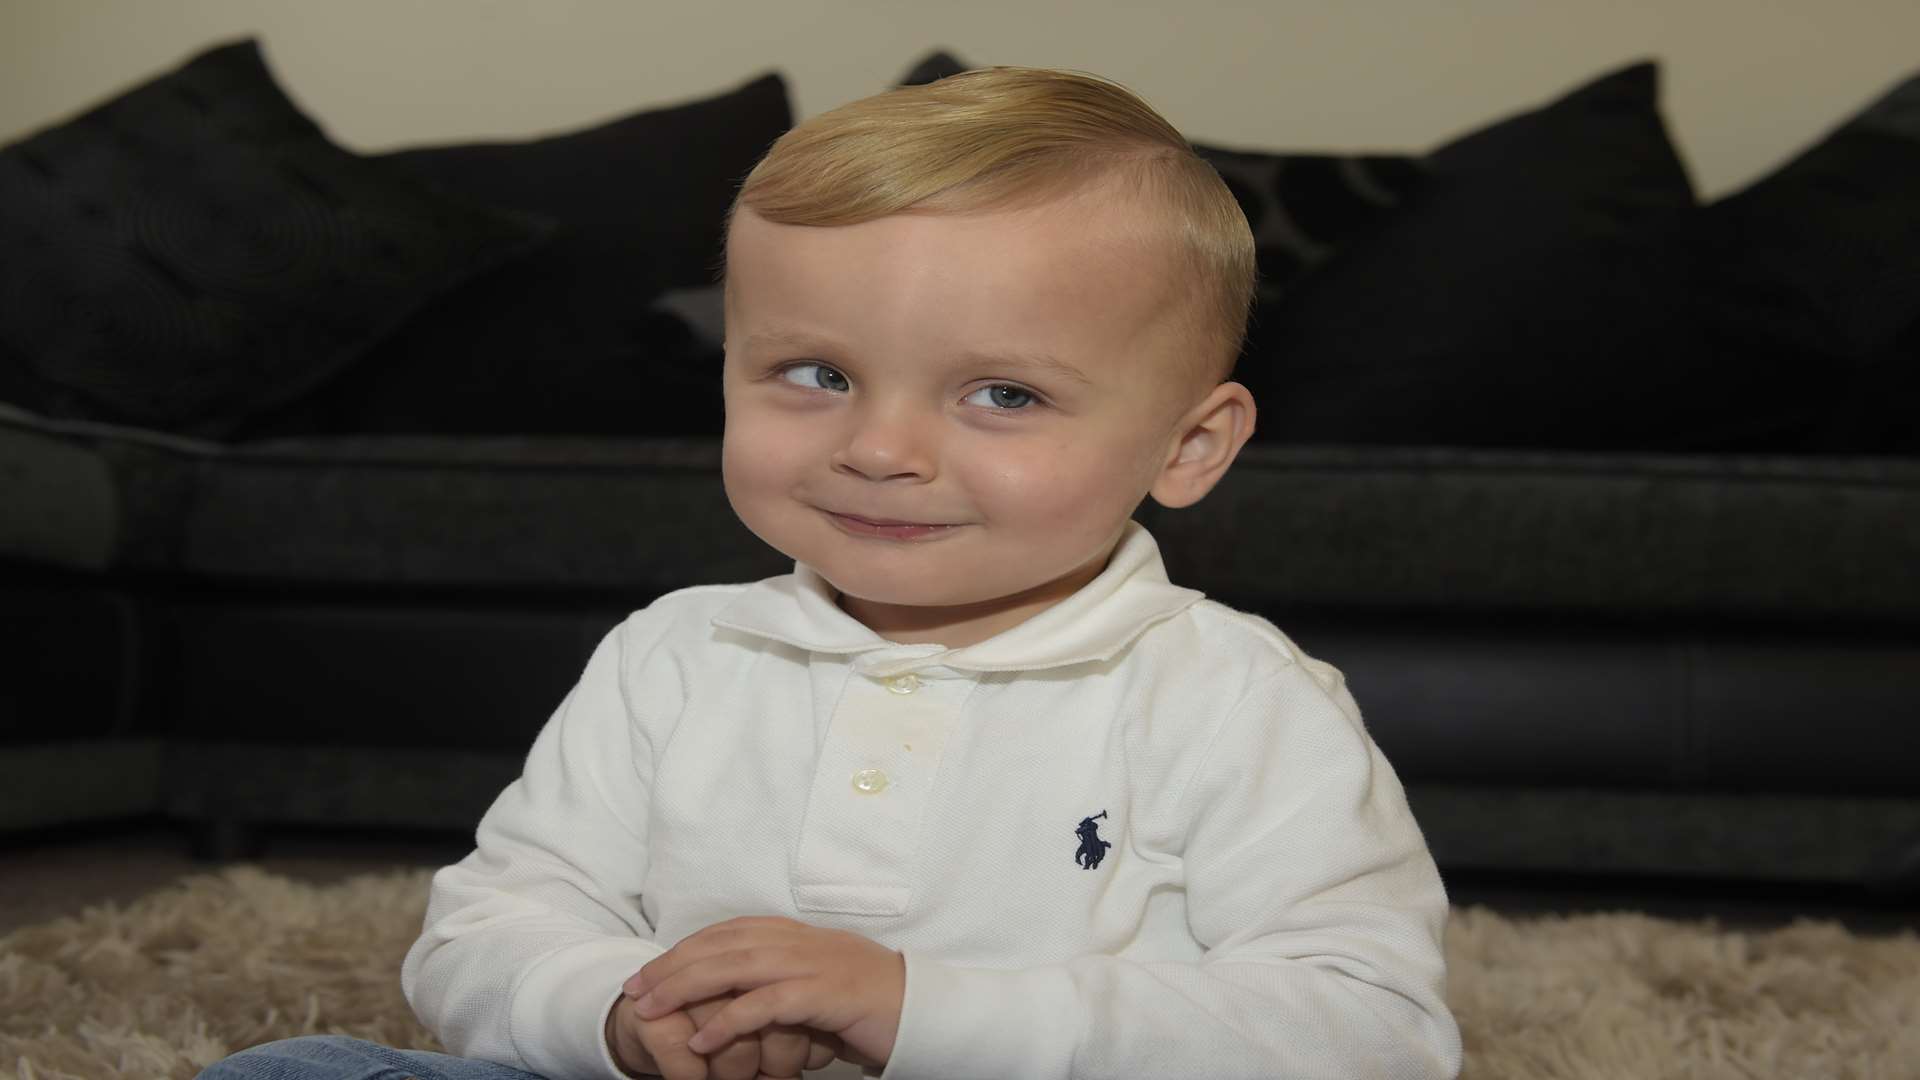 Funds raised from this year's dip will go towards blind toddler Freddie Penny's appeal